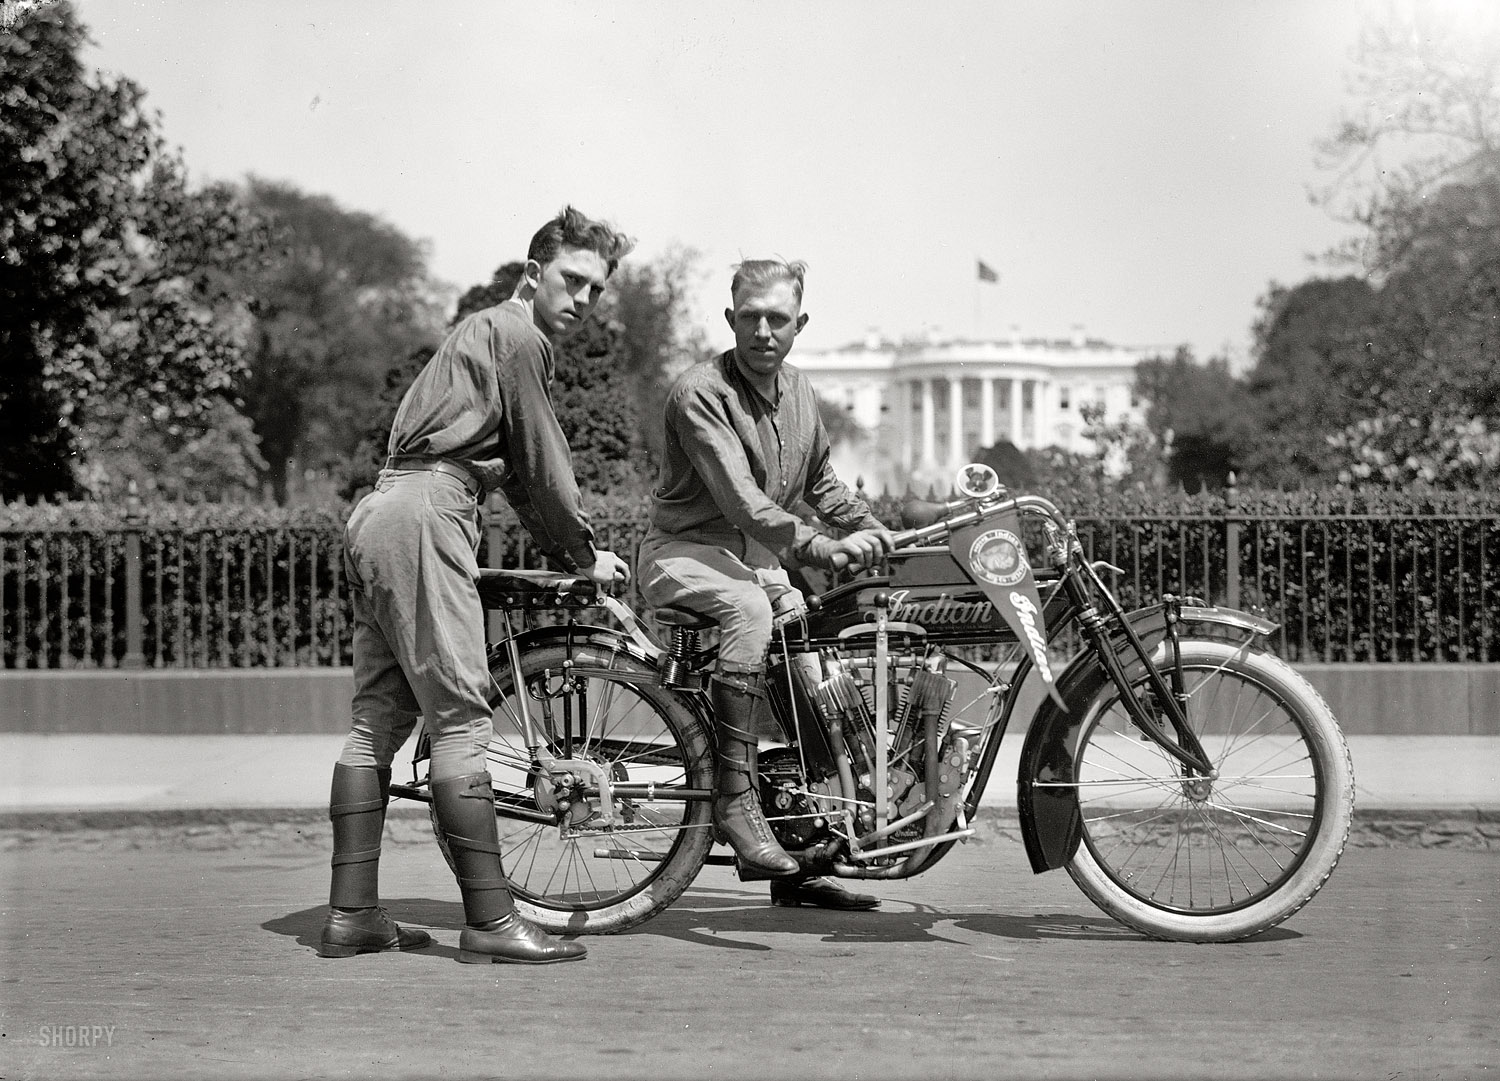 1915. "Baker and O'Brien, transcontinental motorcyclists, back of White House." Bud Baker and Dick O'Brien, whom we first met here. In May 1915 they embarked on a five-month, 10,000-mile jaunt to the West Coast via Indian motorcycle to see the California expositions. Harris & Ewing. View full size.